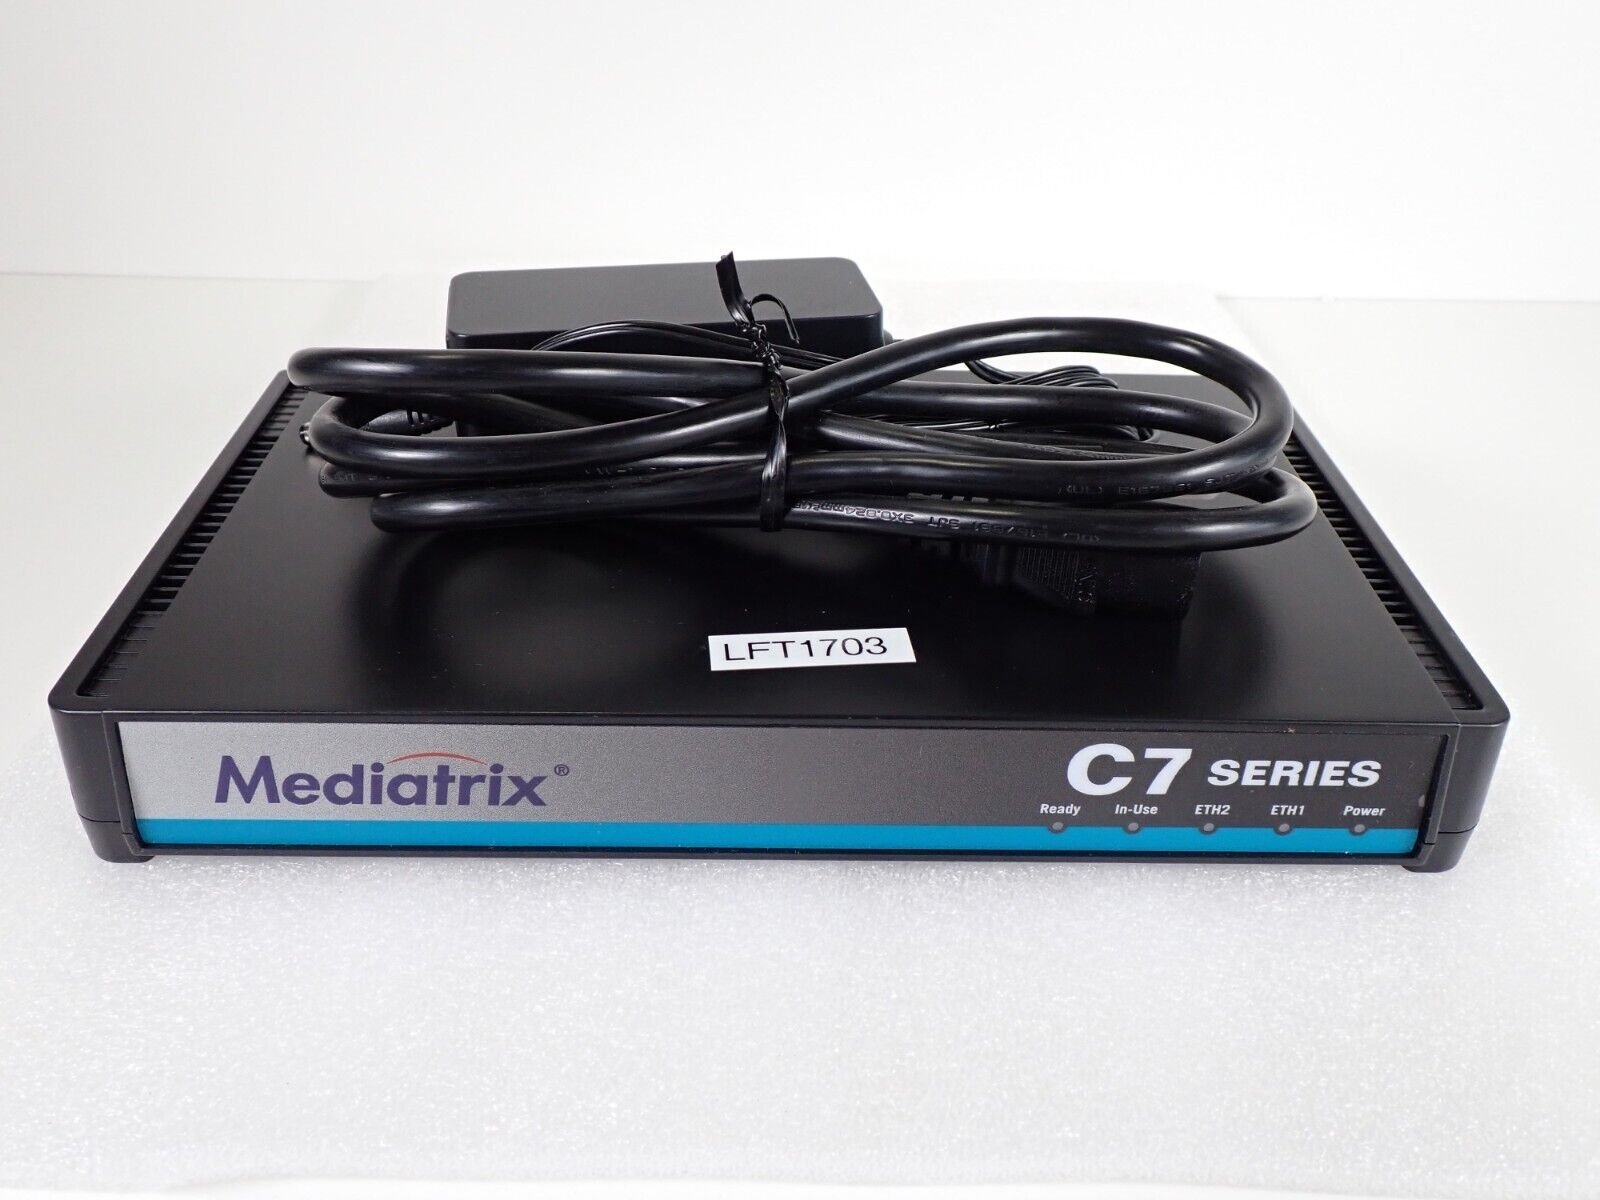 Mediatrix C7 Series C710 VoIP Gateway 4X FXS Ports - Power Tested Only